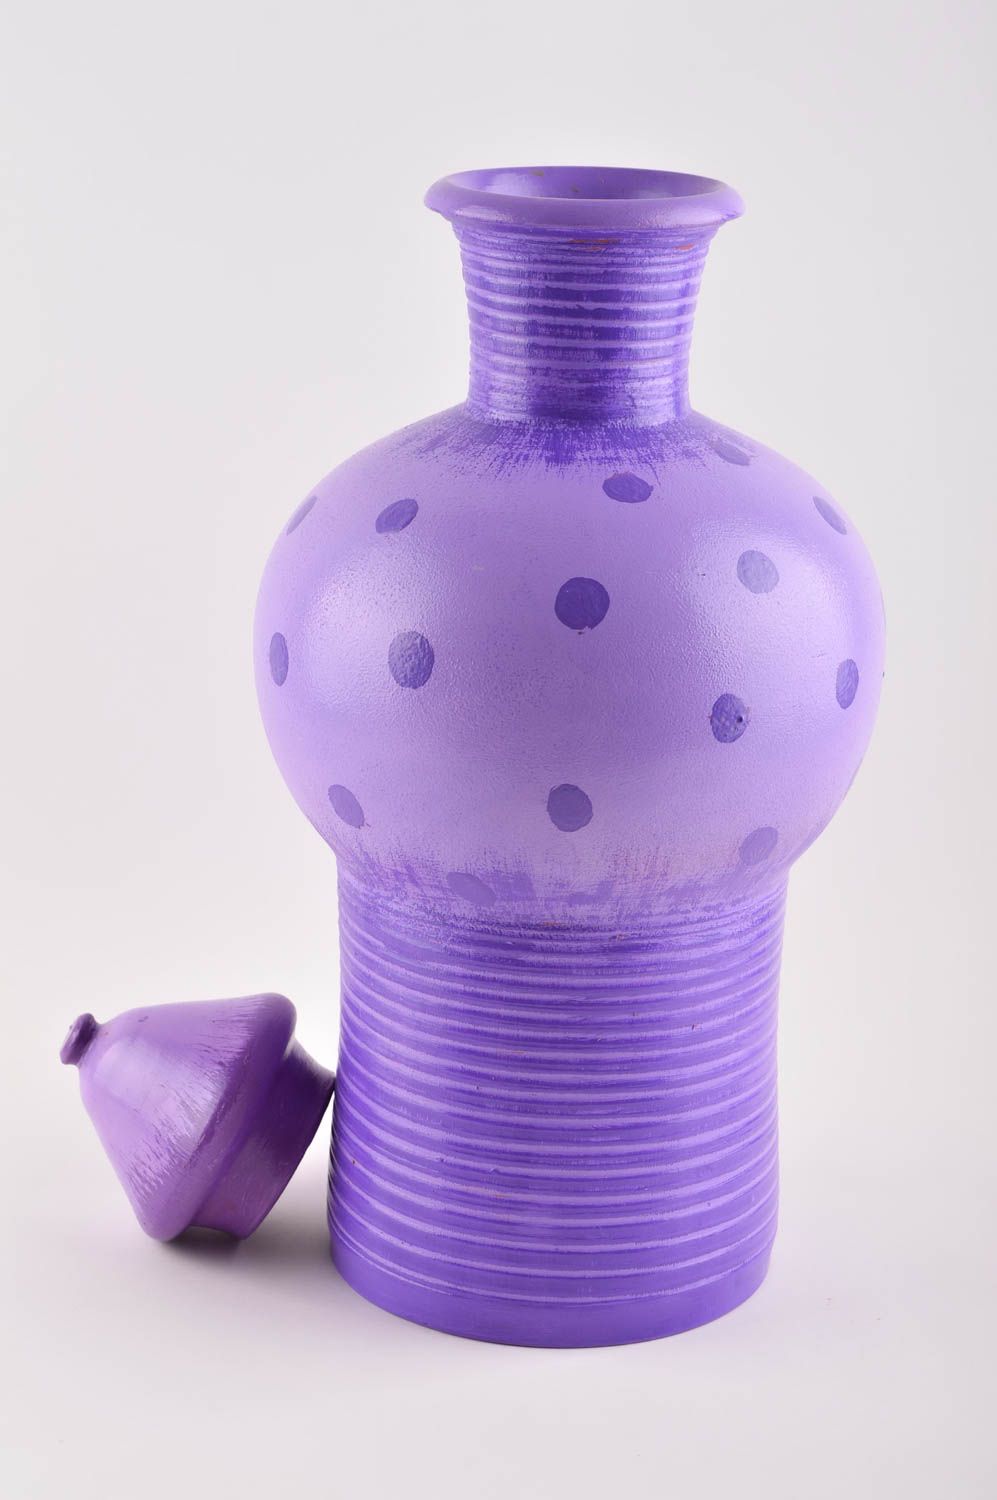 Floor vase 20 inches tall in purple color vase décor 7 lb photo 2